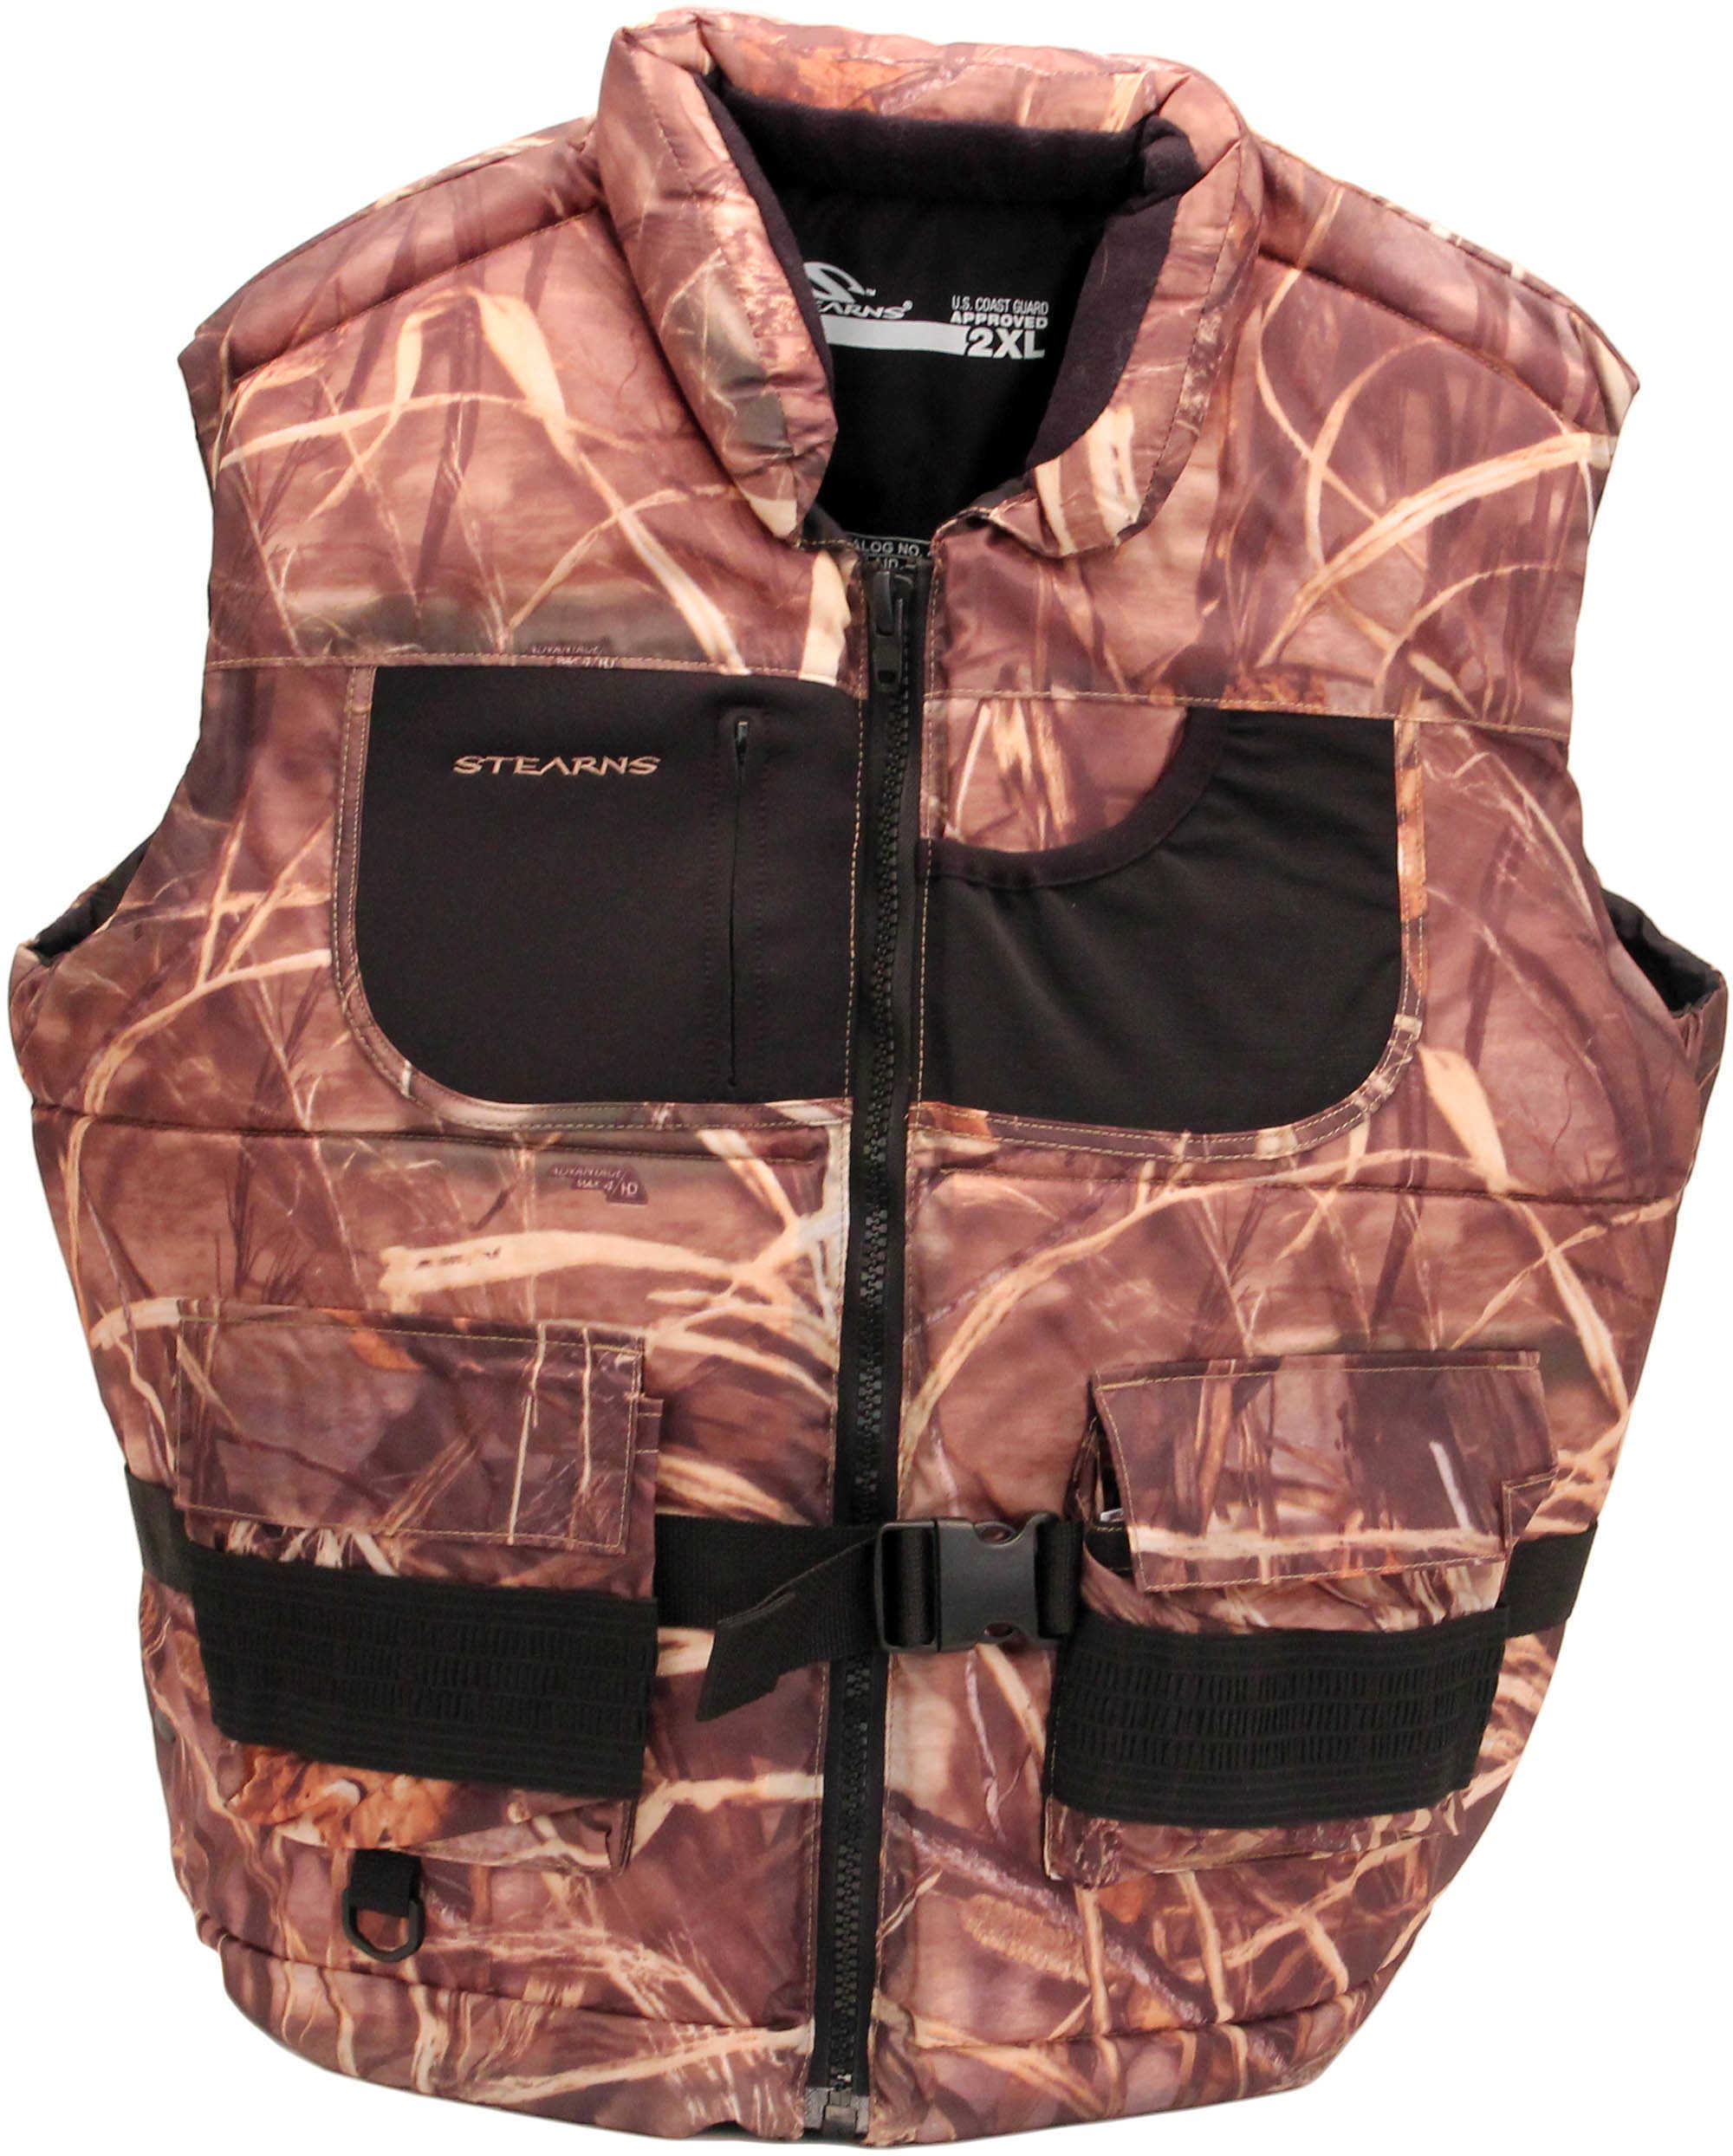 Stearns Hunting Vest Adult, Camo Xx-Large Md: 2000009737